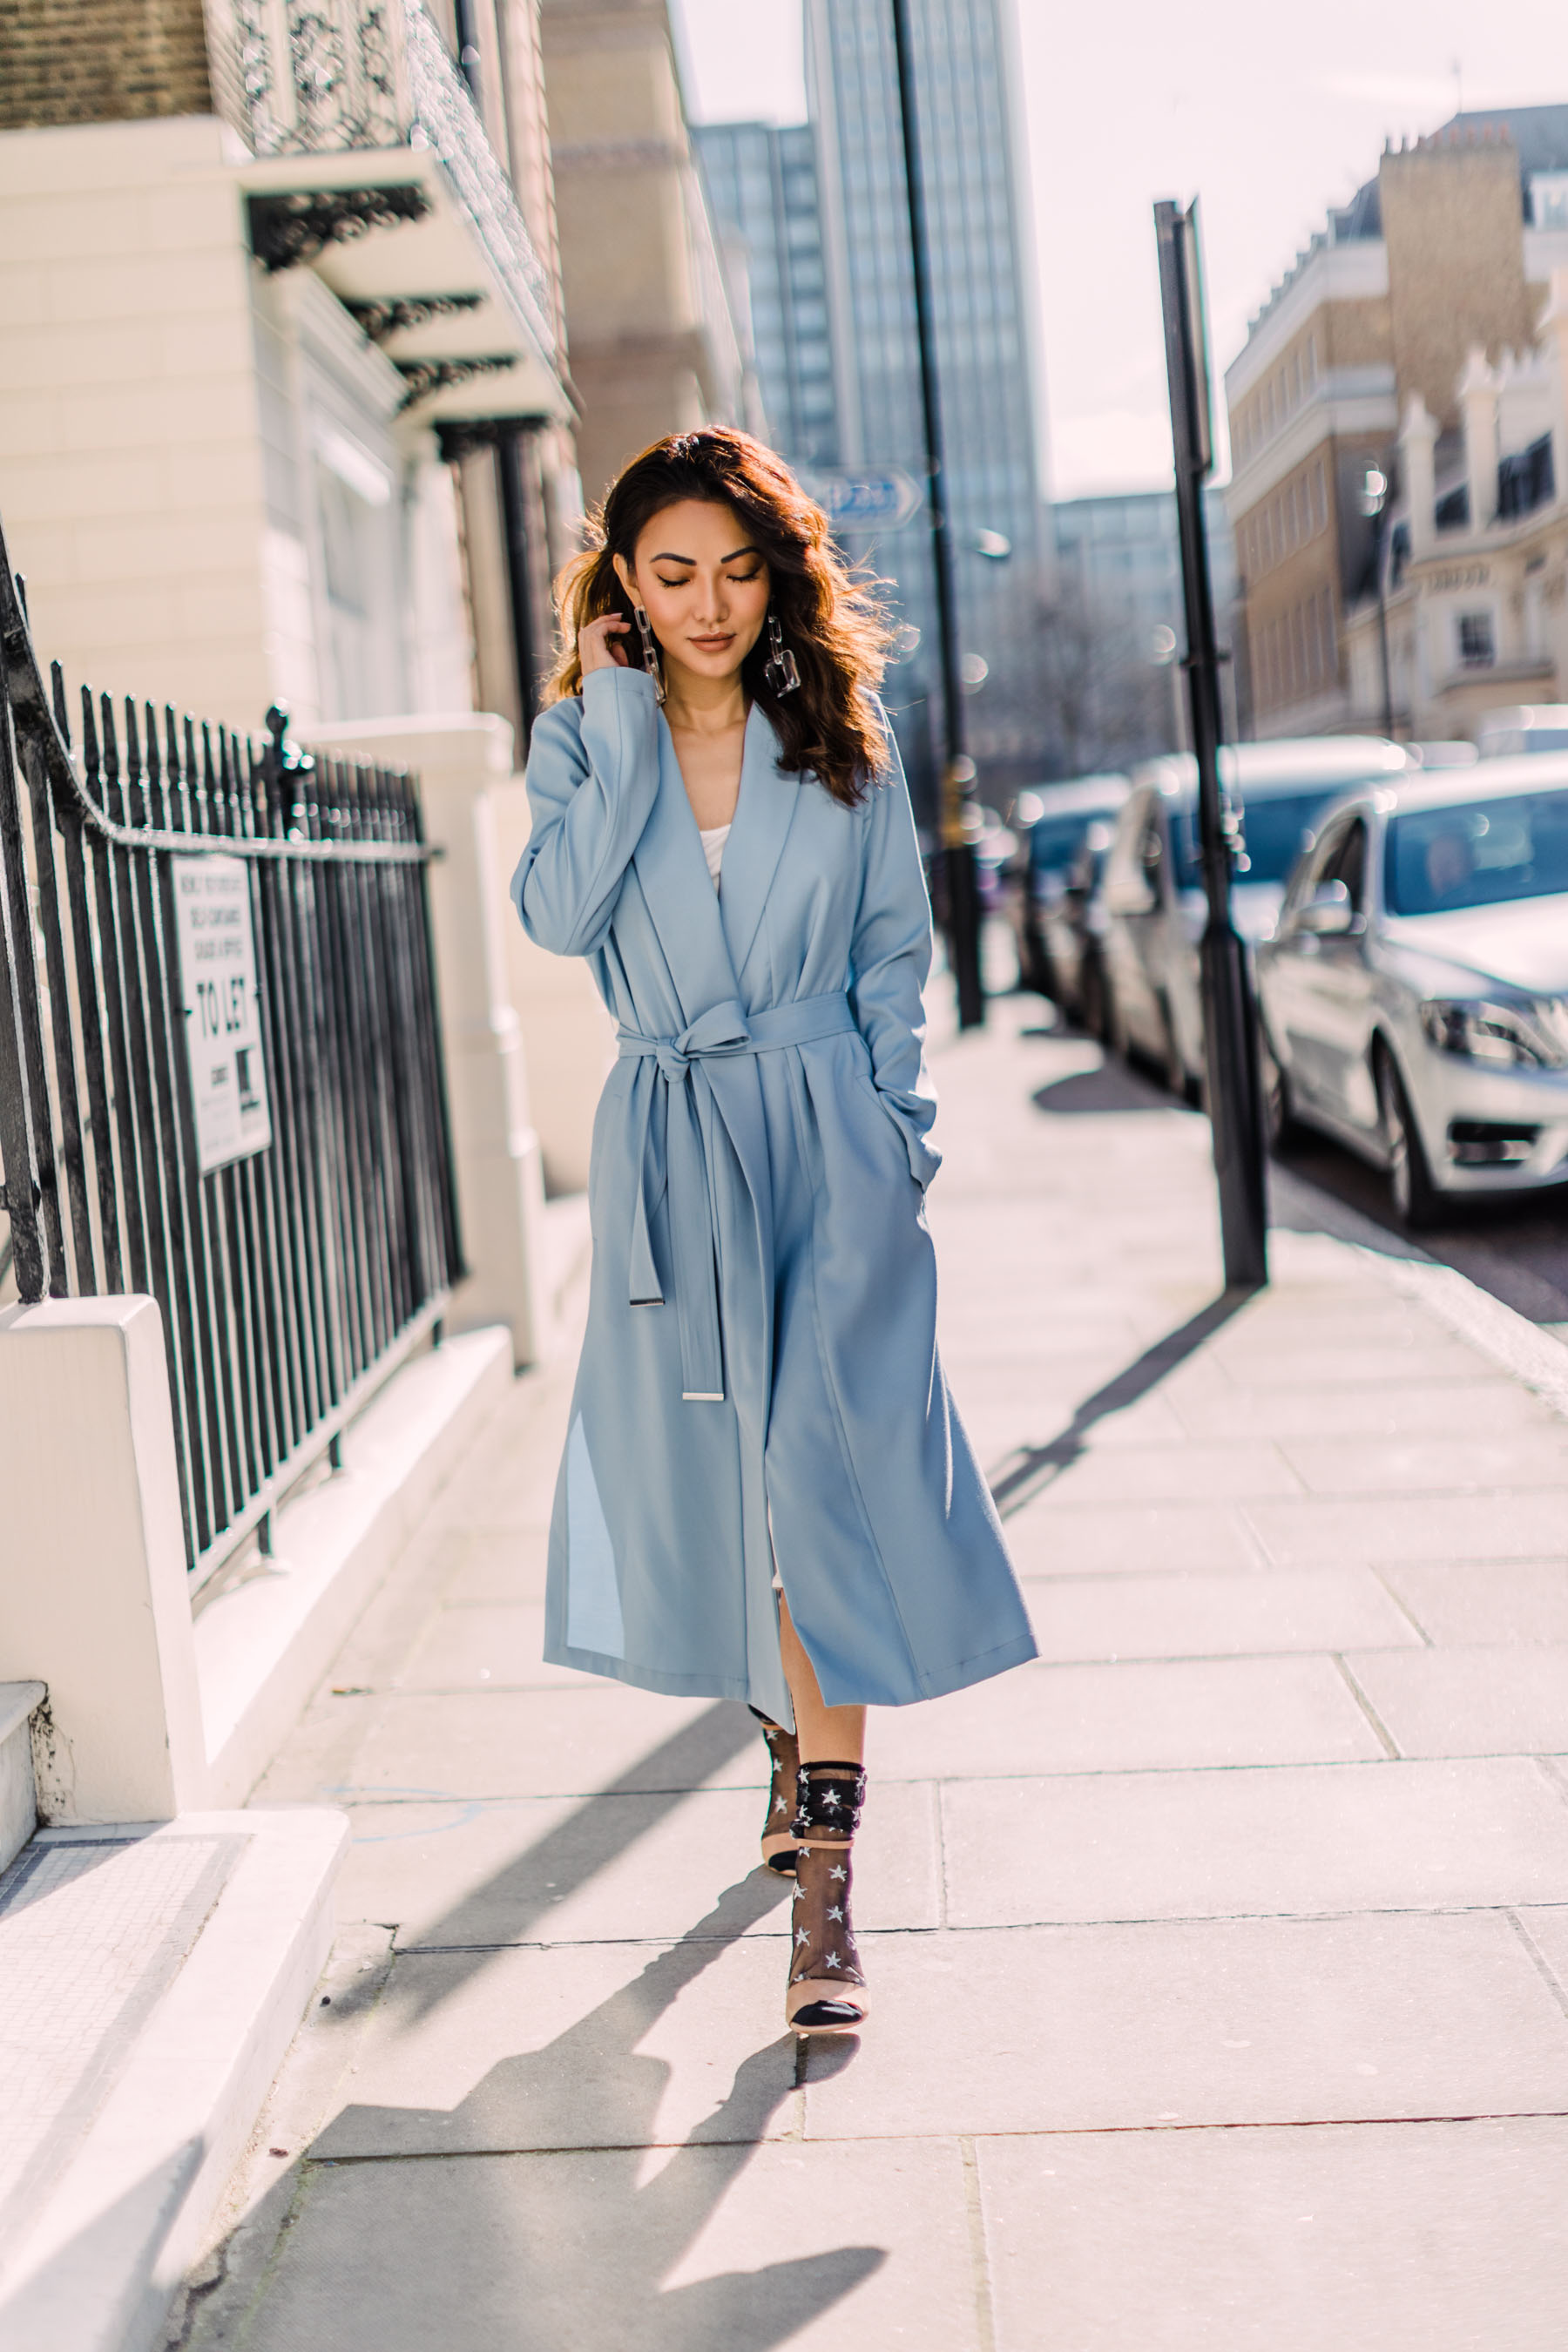 Transition Your Wardrobe into Spring - DSW Nude heels, blue trench coat, socks with sandals, nude heels, nude sandals, minimalist heels, ankle strap heels // Notjessfashion.com